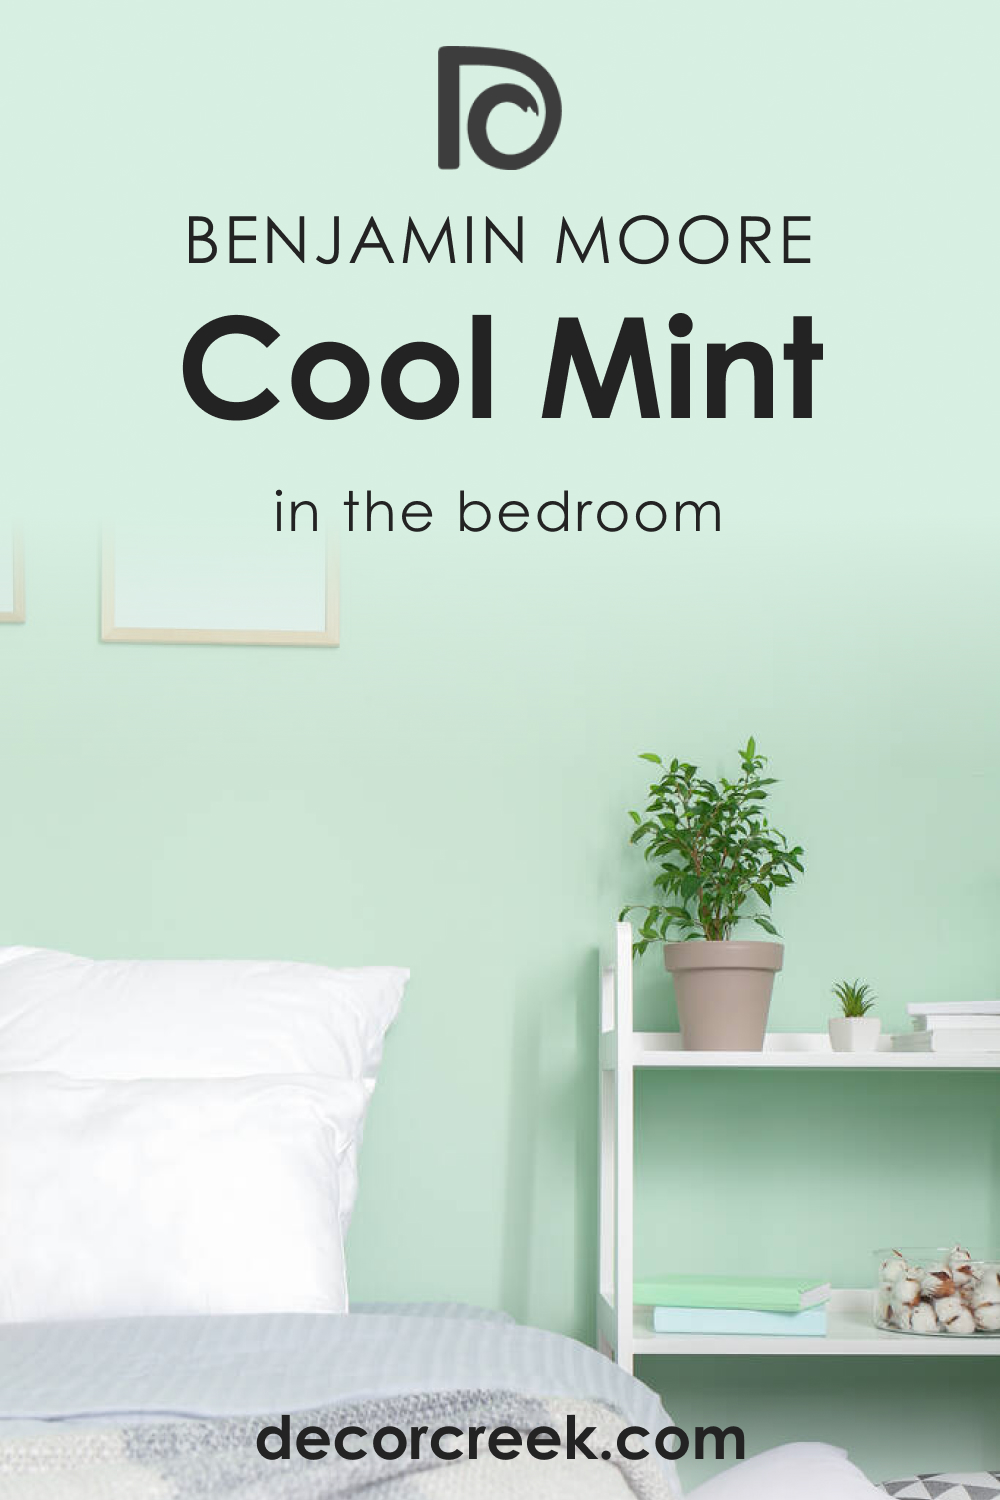 How to Use Cool Mint 582 in the Bedroom?